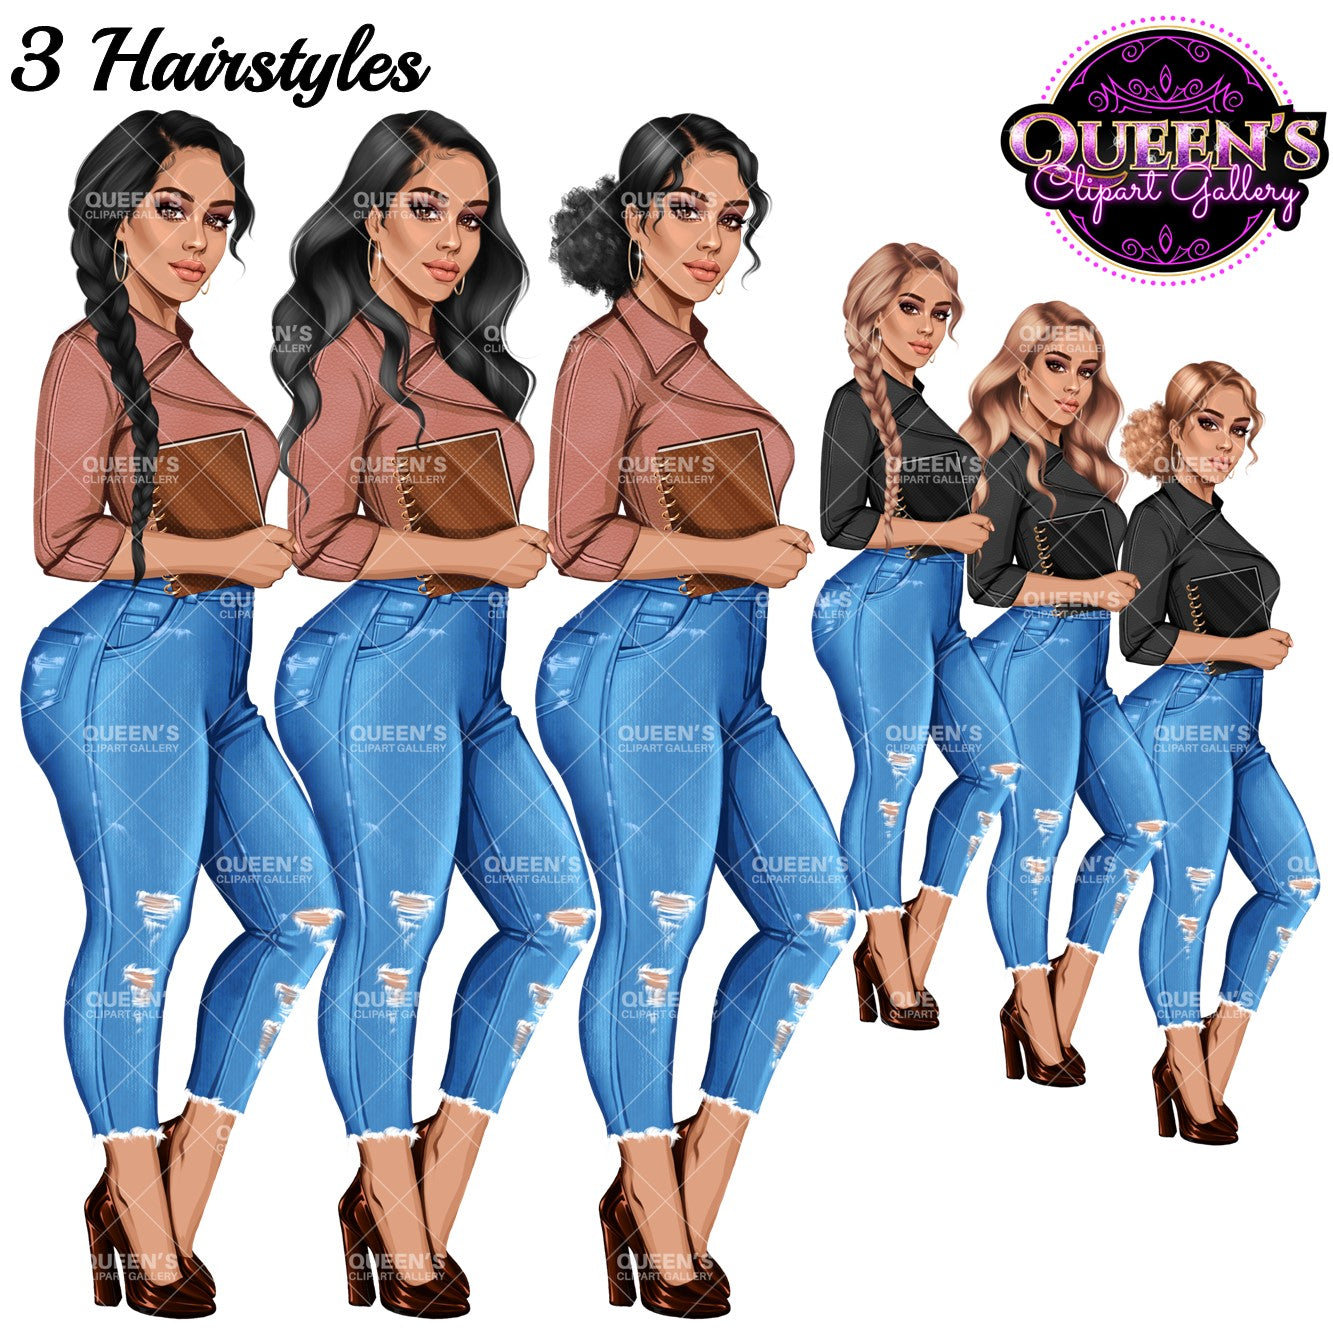 Planner girl clipart, Lady boss clipart, Curvy girl clipart, Fashion girl clipart, Jeans girl clipart, Denim jeans clipart, Girl boss, Woman